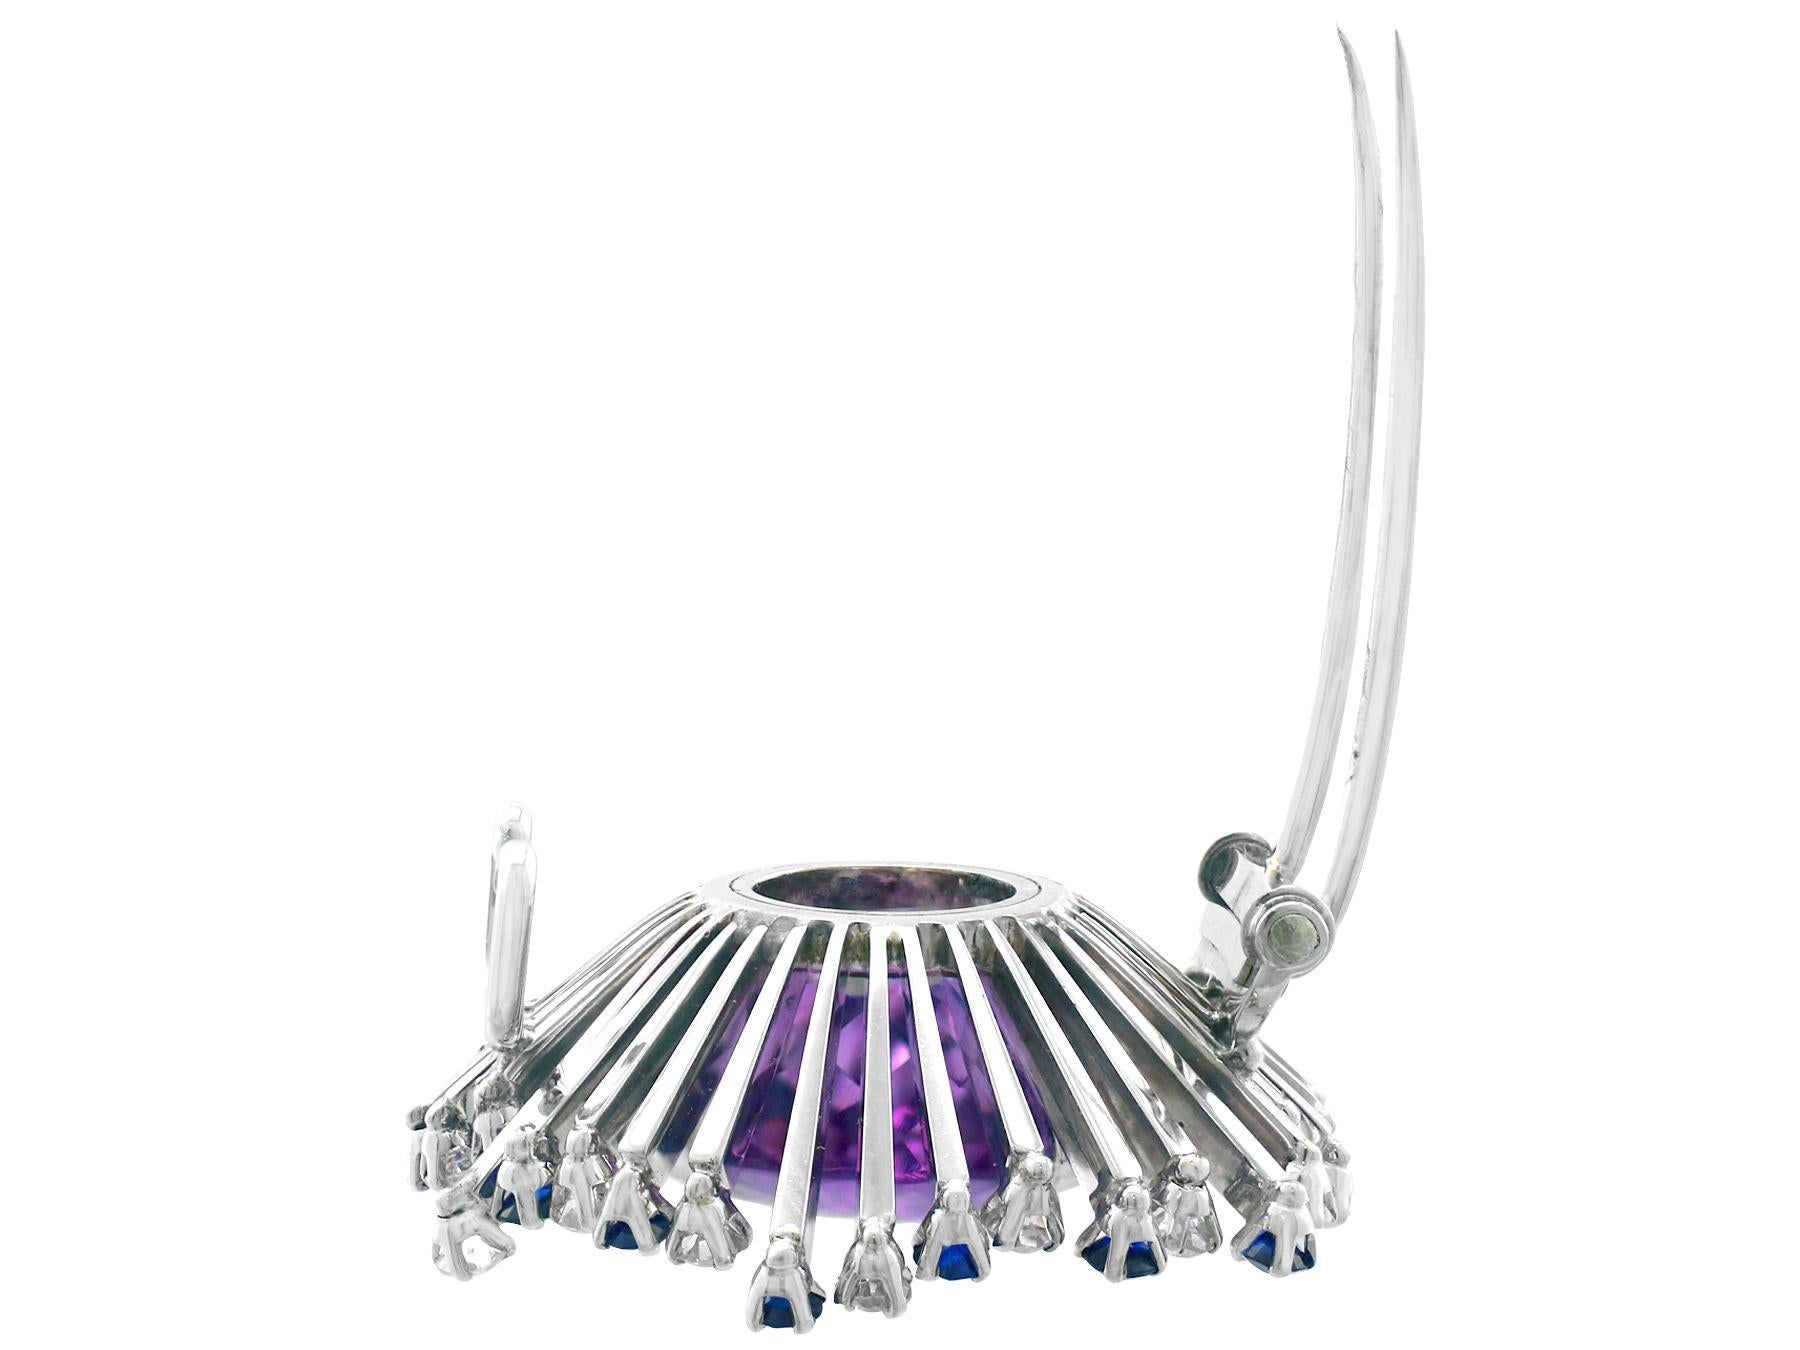 21.88ct Amethyst 1.80 Carat Diamond 1.44 Carat Sapphire and White Gold Brooch For Sale 1